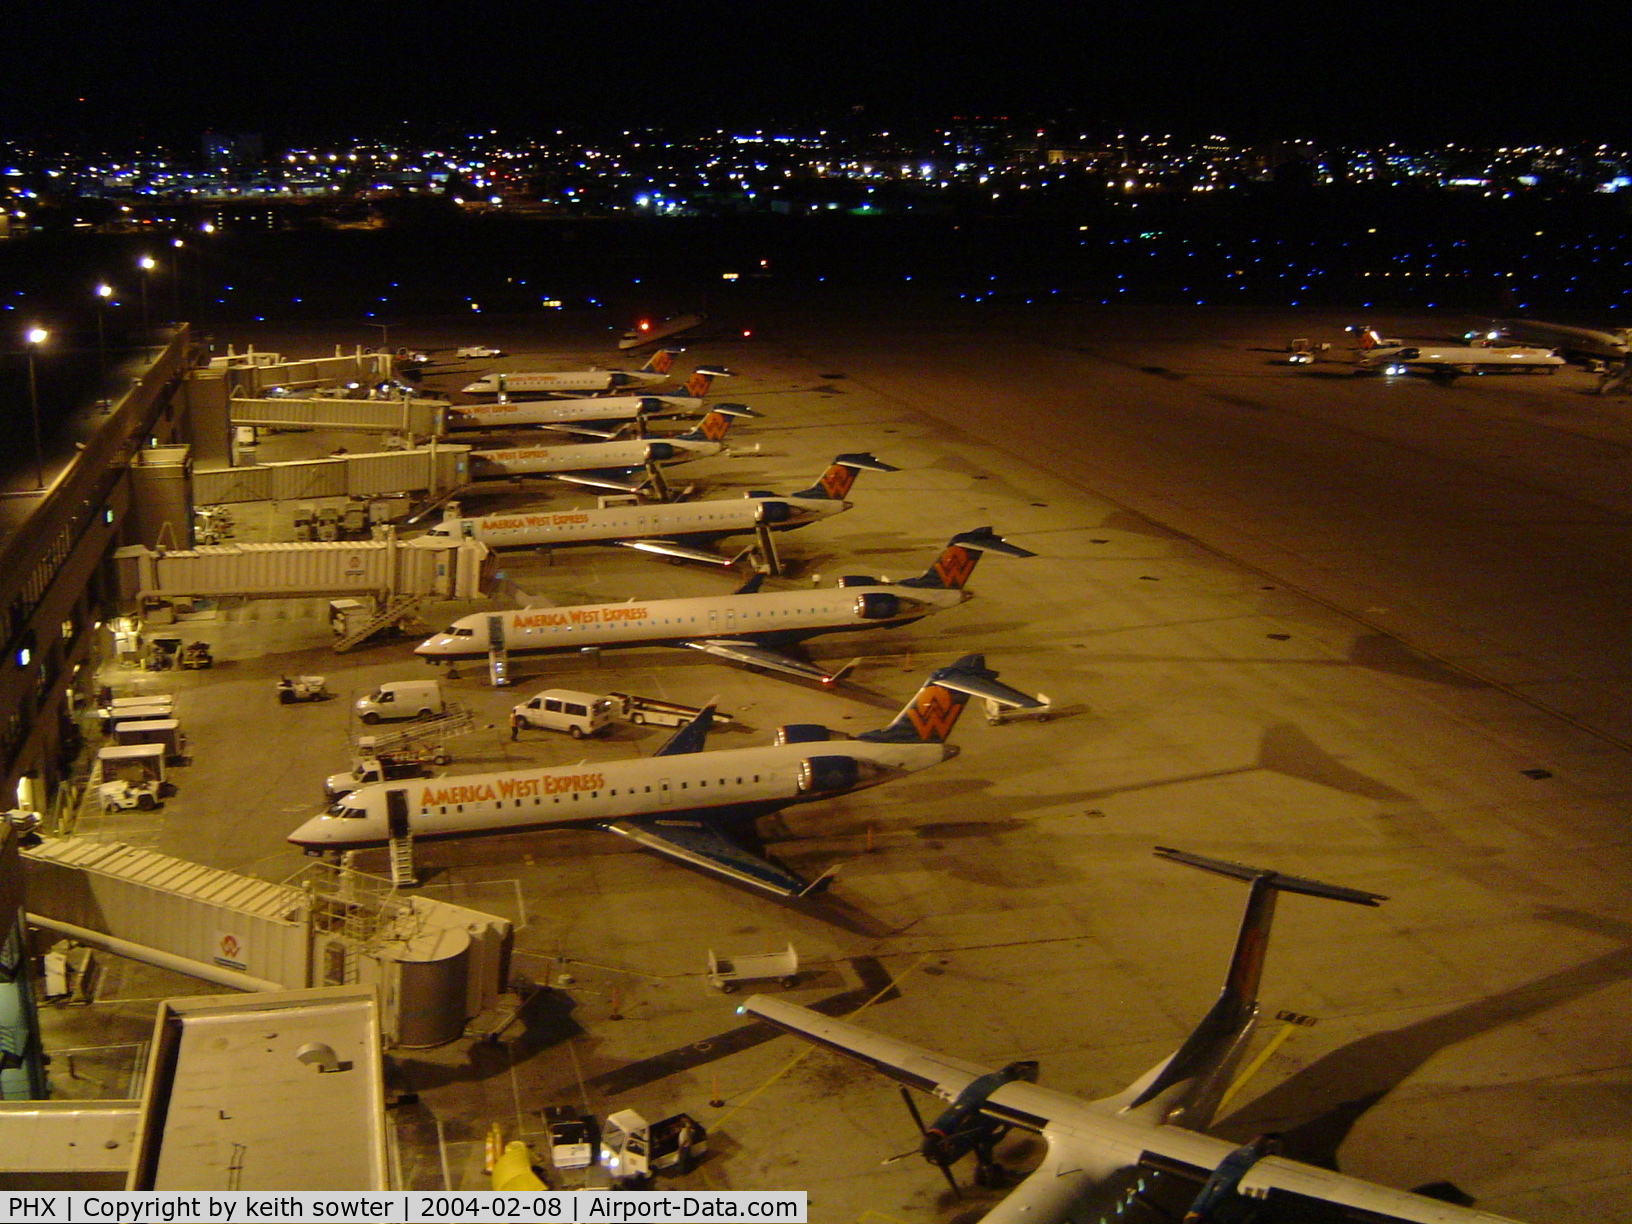 Phoenix Sky Harbor International Airport (PHX) - Taken from the car park roof - full stand